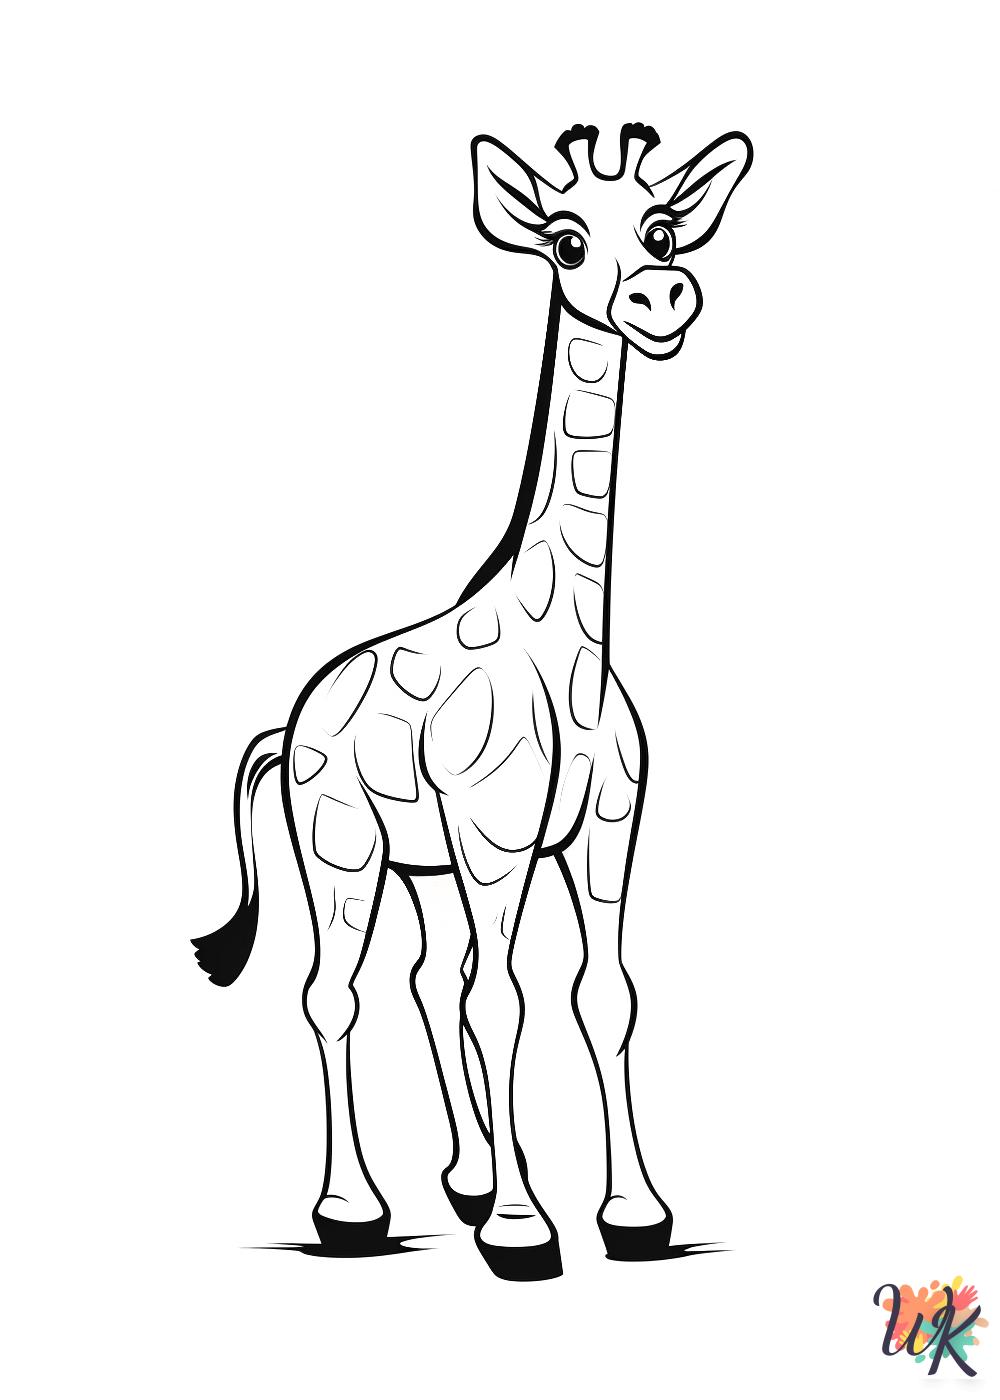 Giraffe free coloring pages